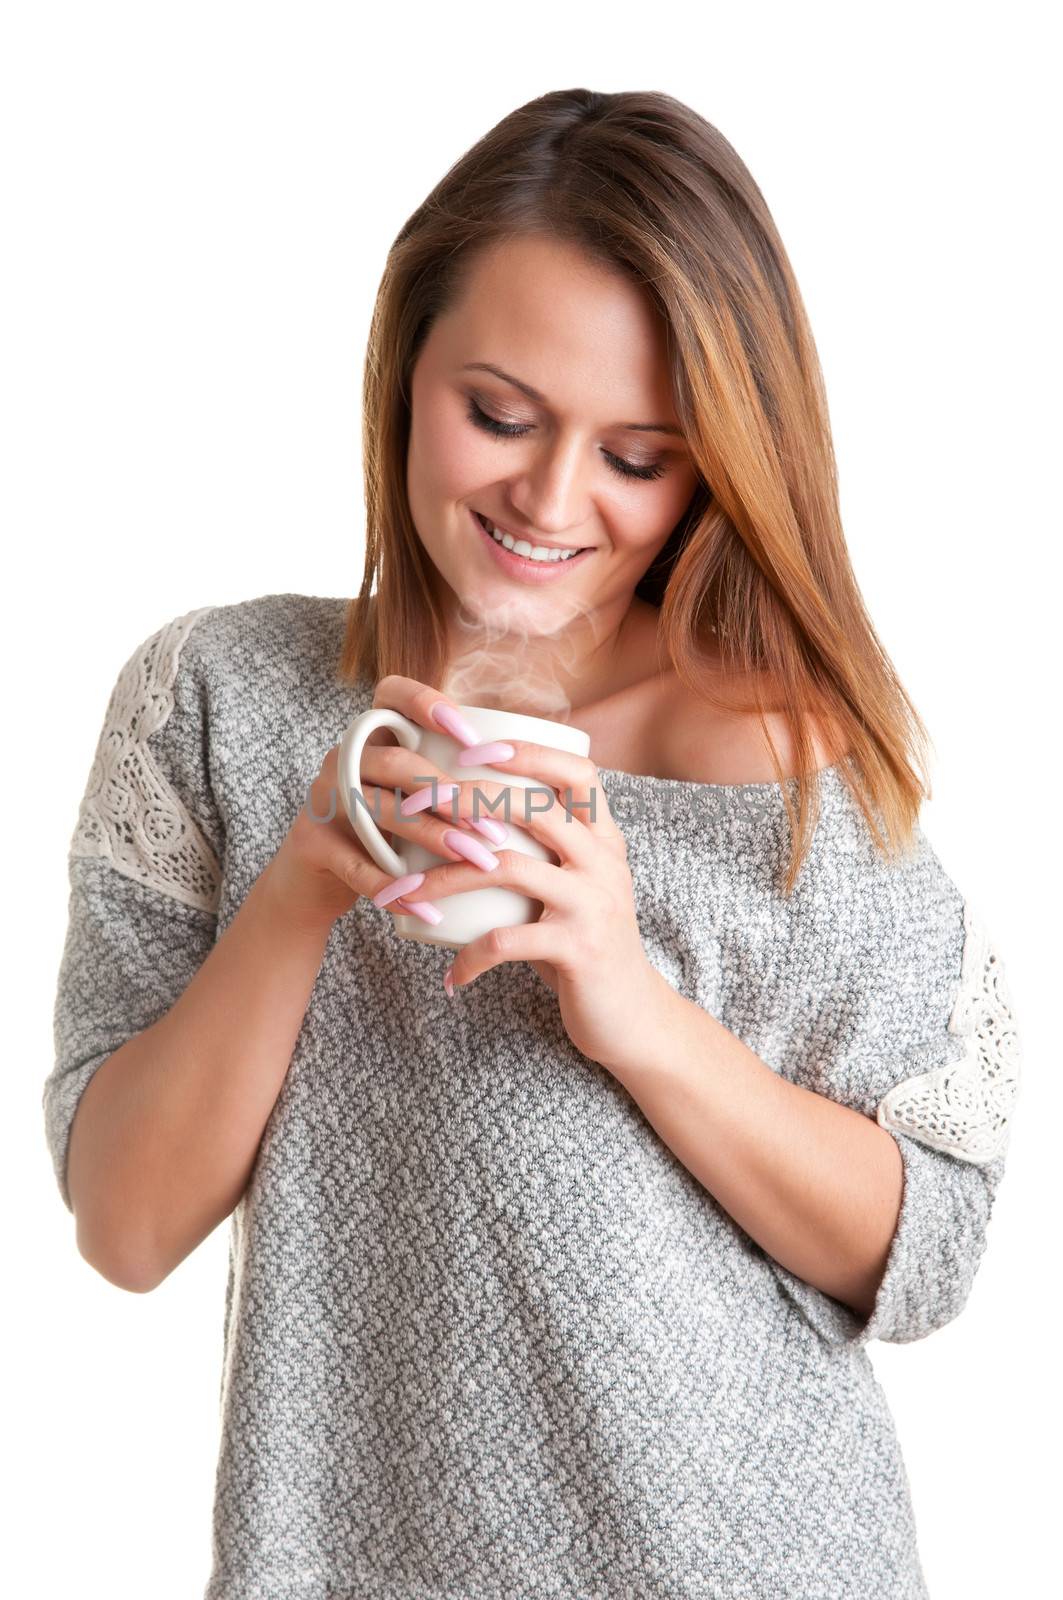 Woman smelling a cup of coffee, ready to drink it, isolated in white